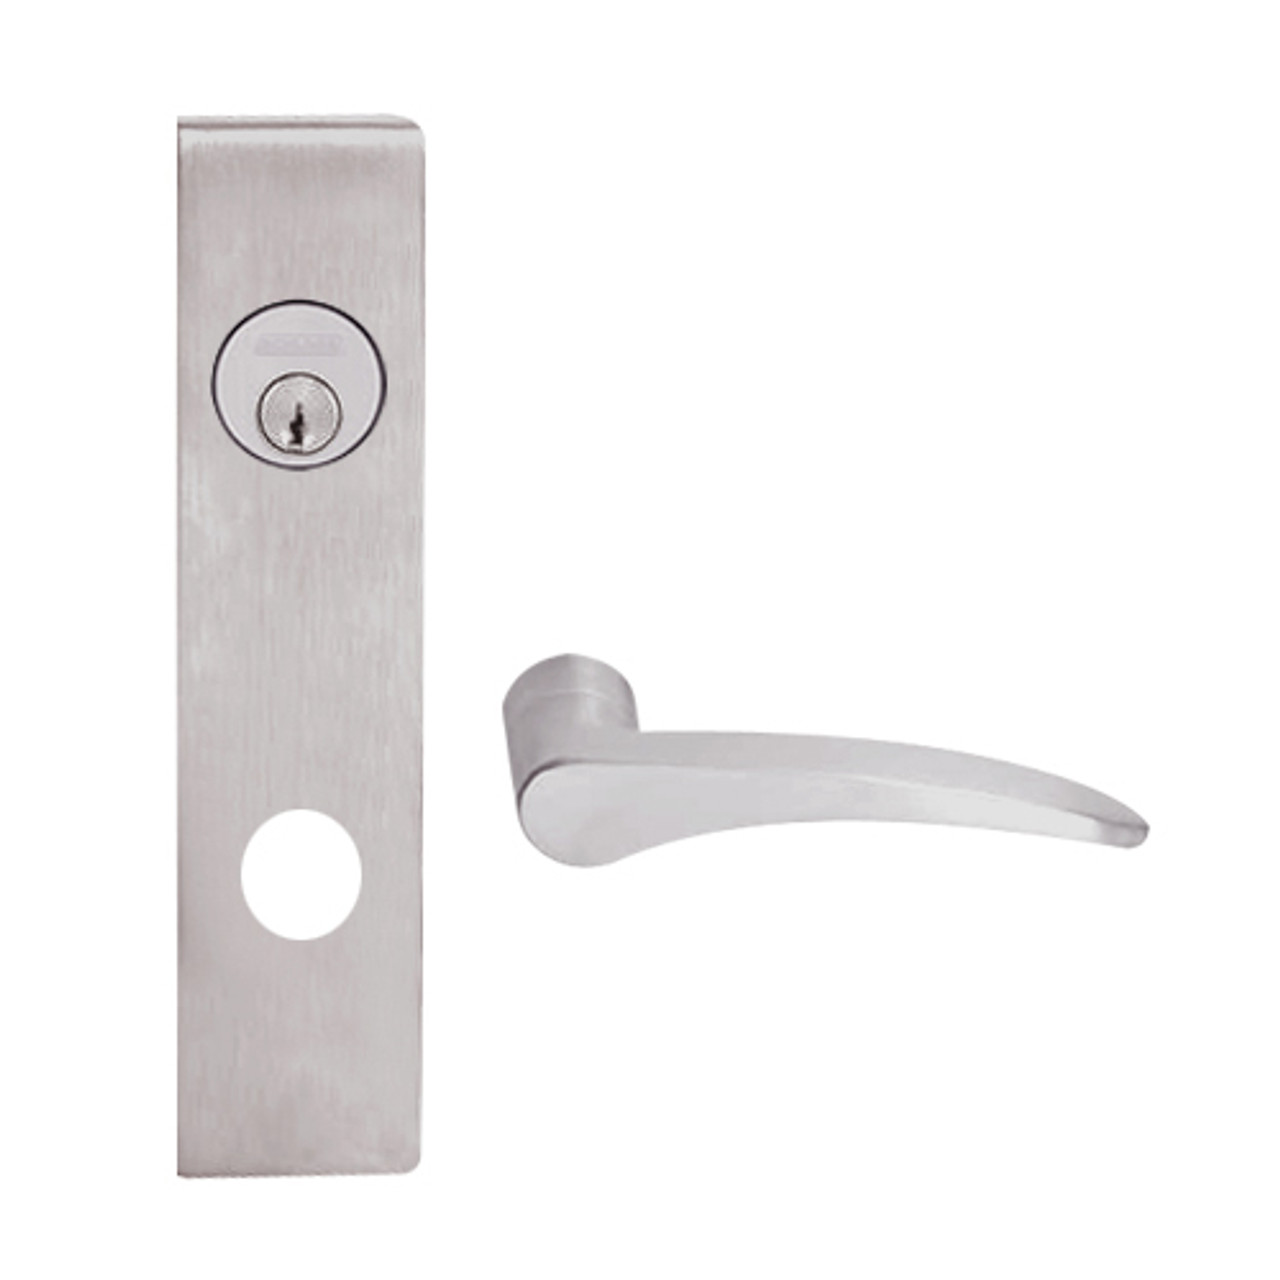 L9080L-12L-630-LH Schlage L Series Less Cylinder Storeroom Commercial Mortise Lock with 12 Cast Lever Design in Satin Stainless Steel